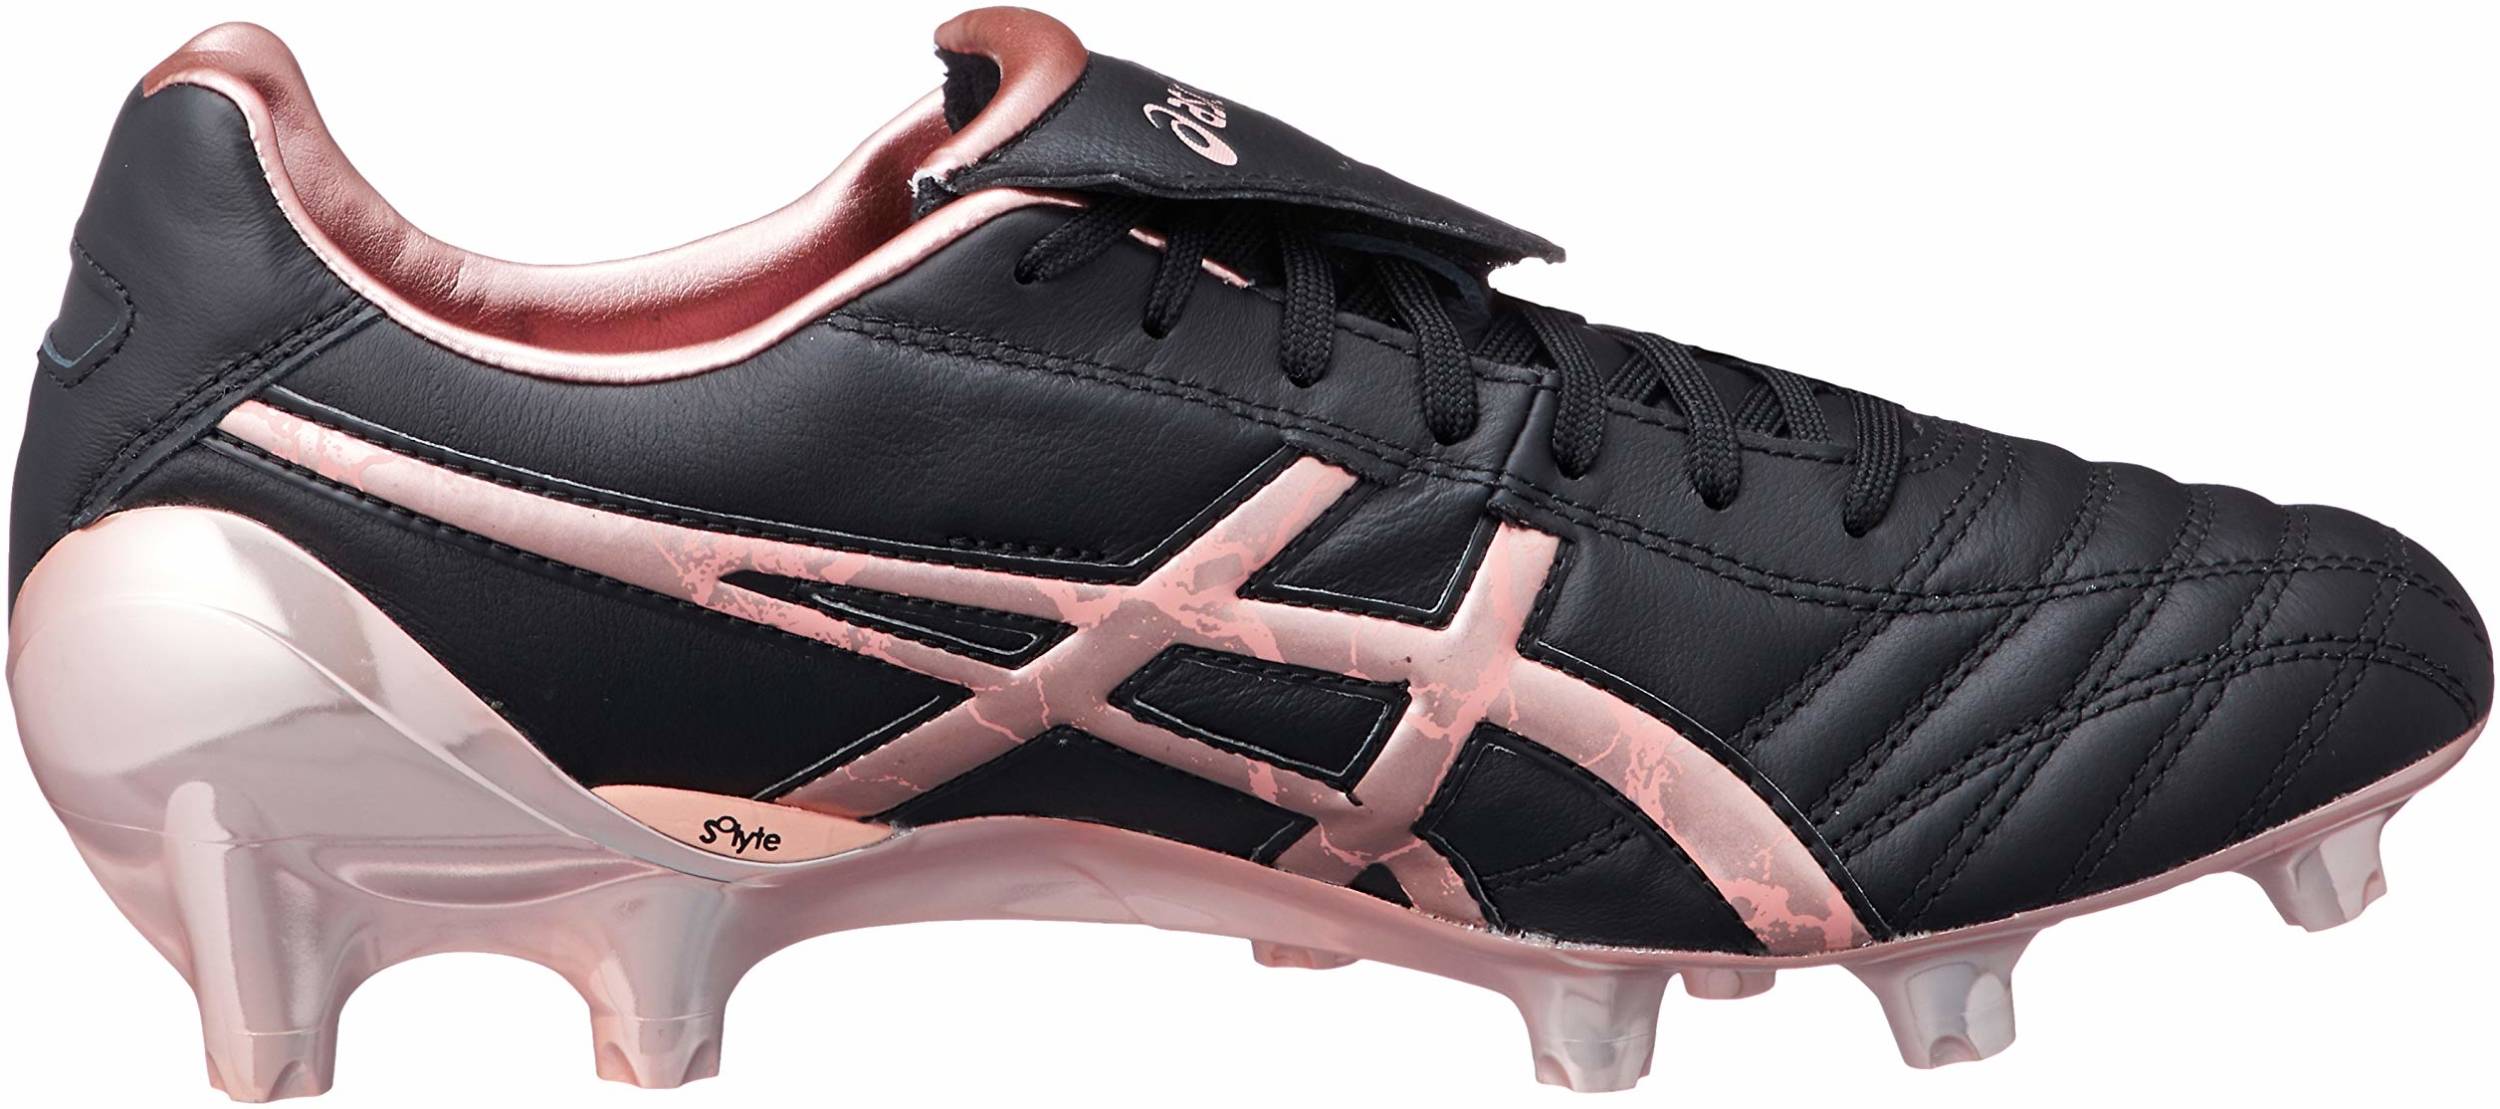 Asics soccer cleats (4 models in stock 